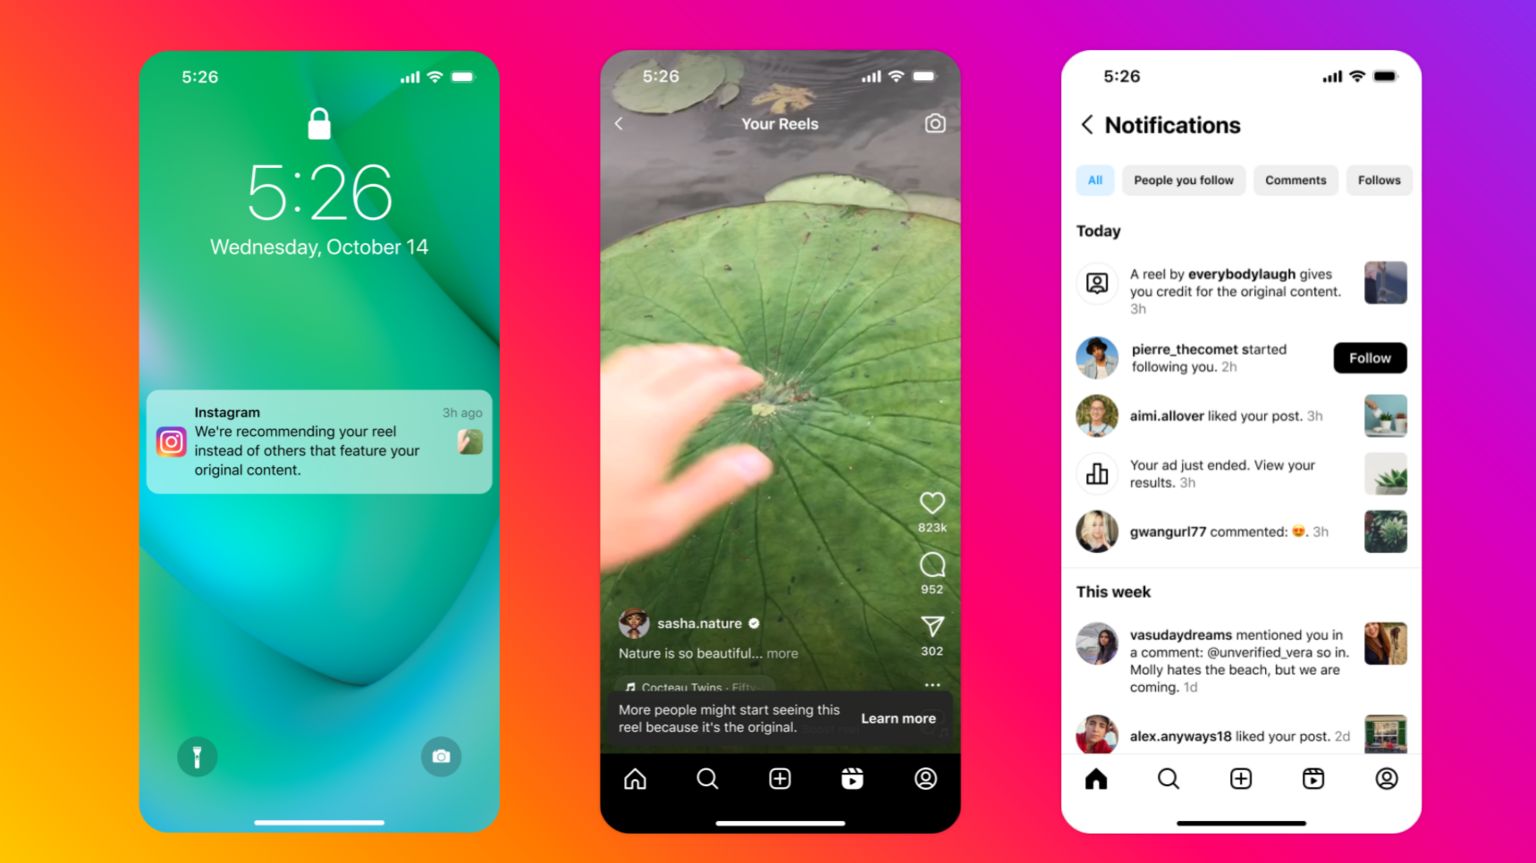 Mock-up illustrations of users receiving notifications about Instagram's new approach to original content